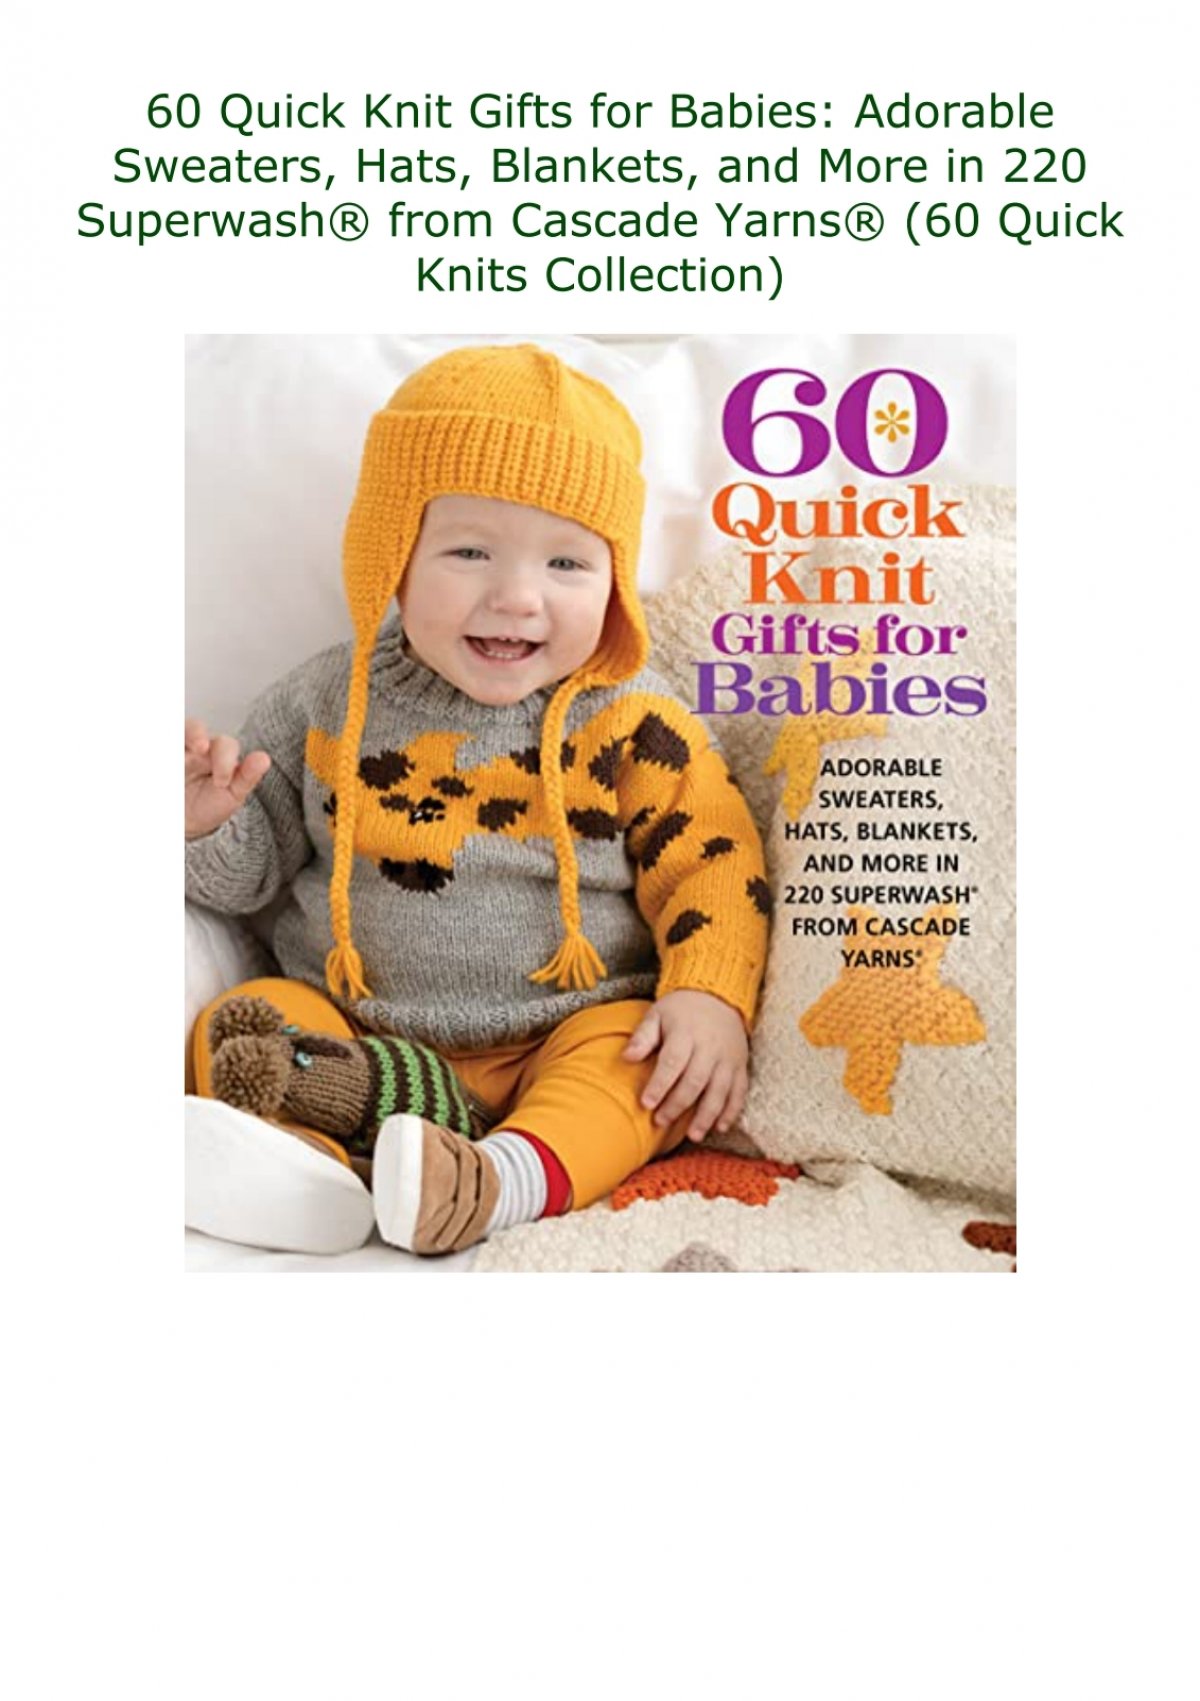 60 Quick Knit Gifts for Babies: Adorable Sweaters, Hats, Blankets, and More  in 220 Superwash® from Cascade Yarns® (60 Quick Knits Collection)